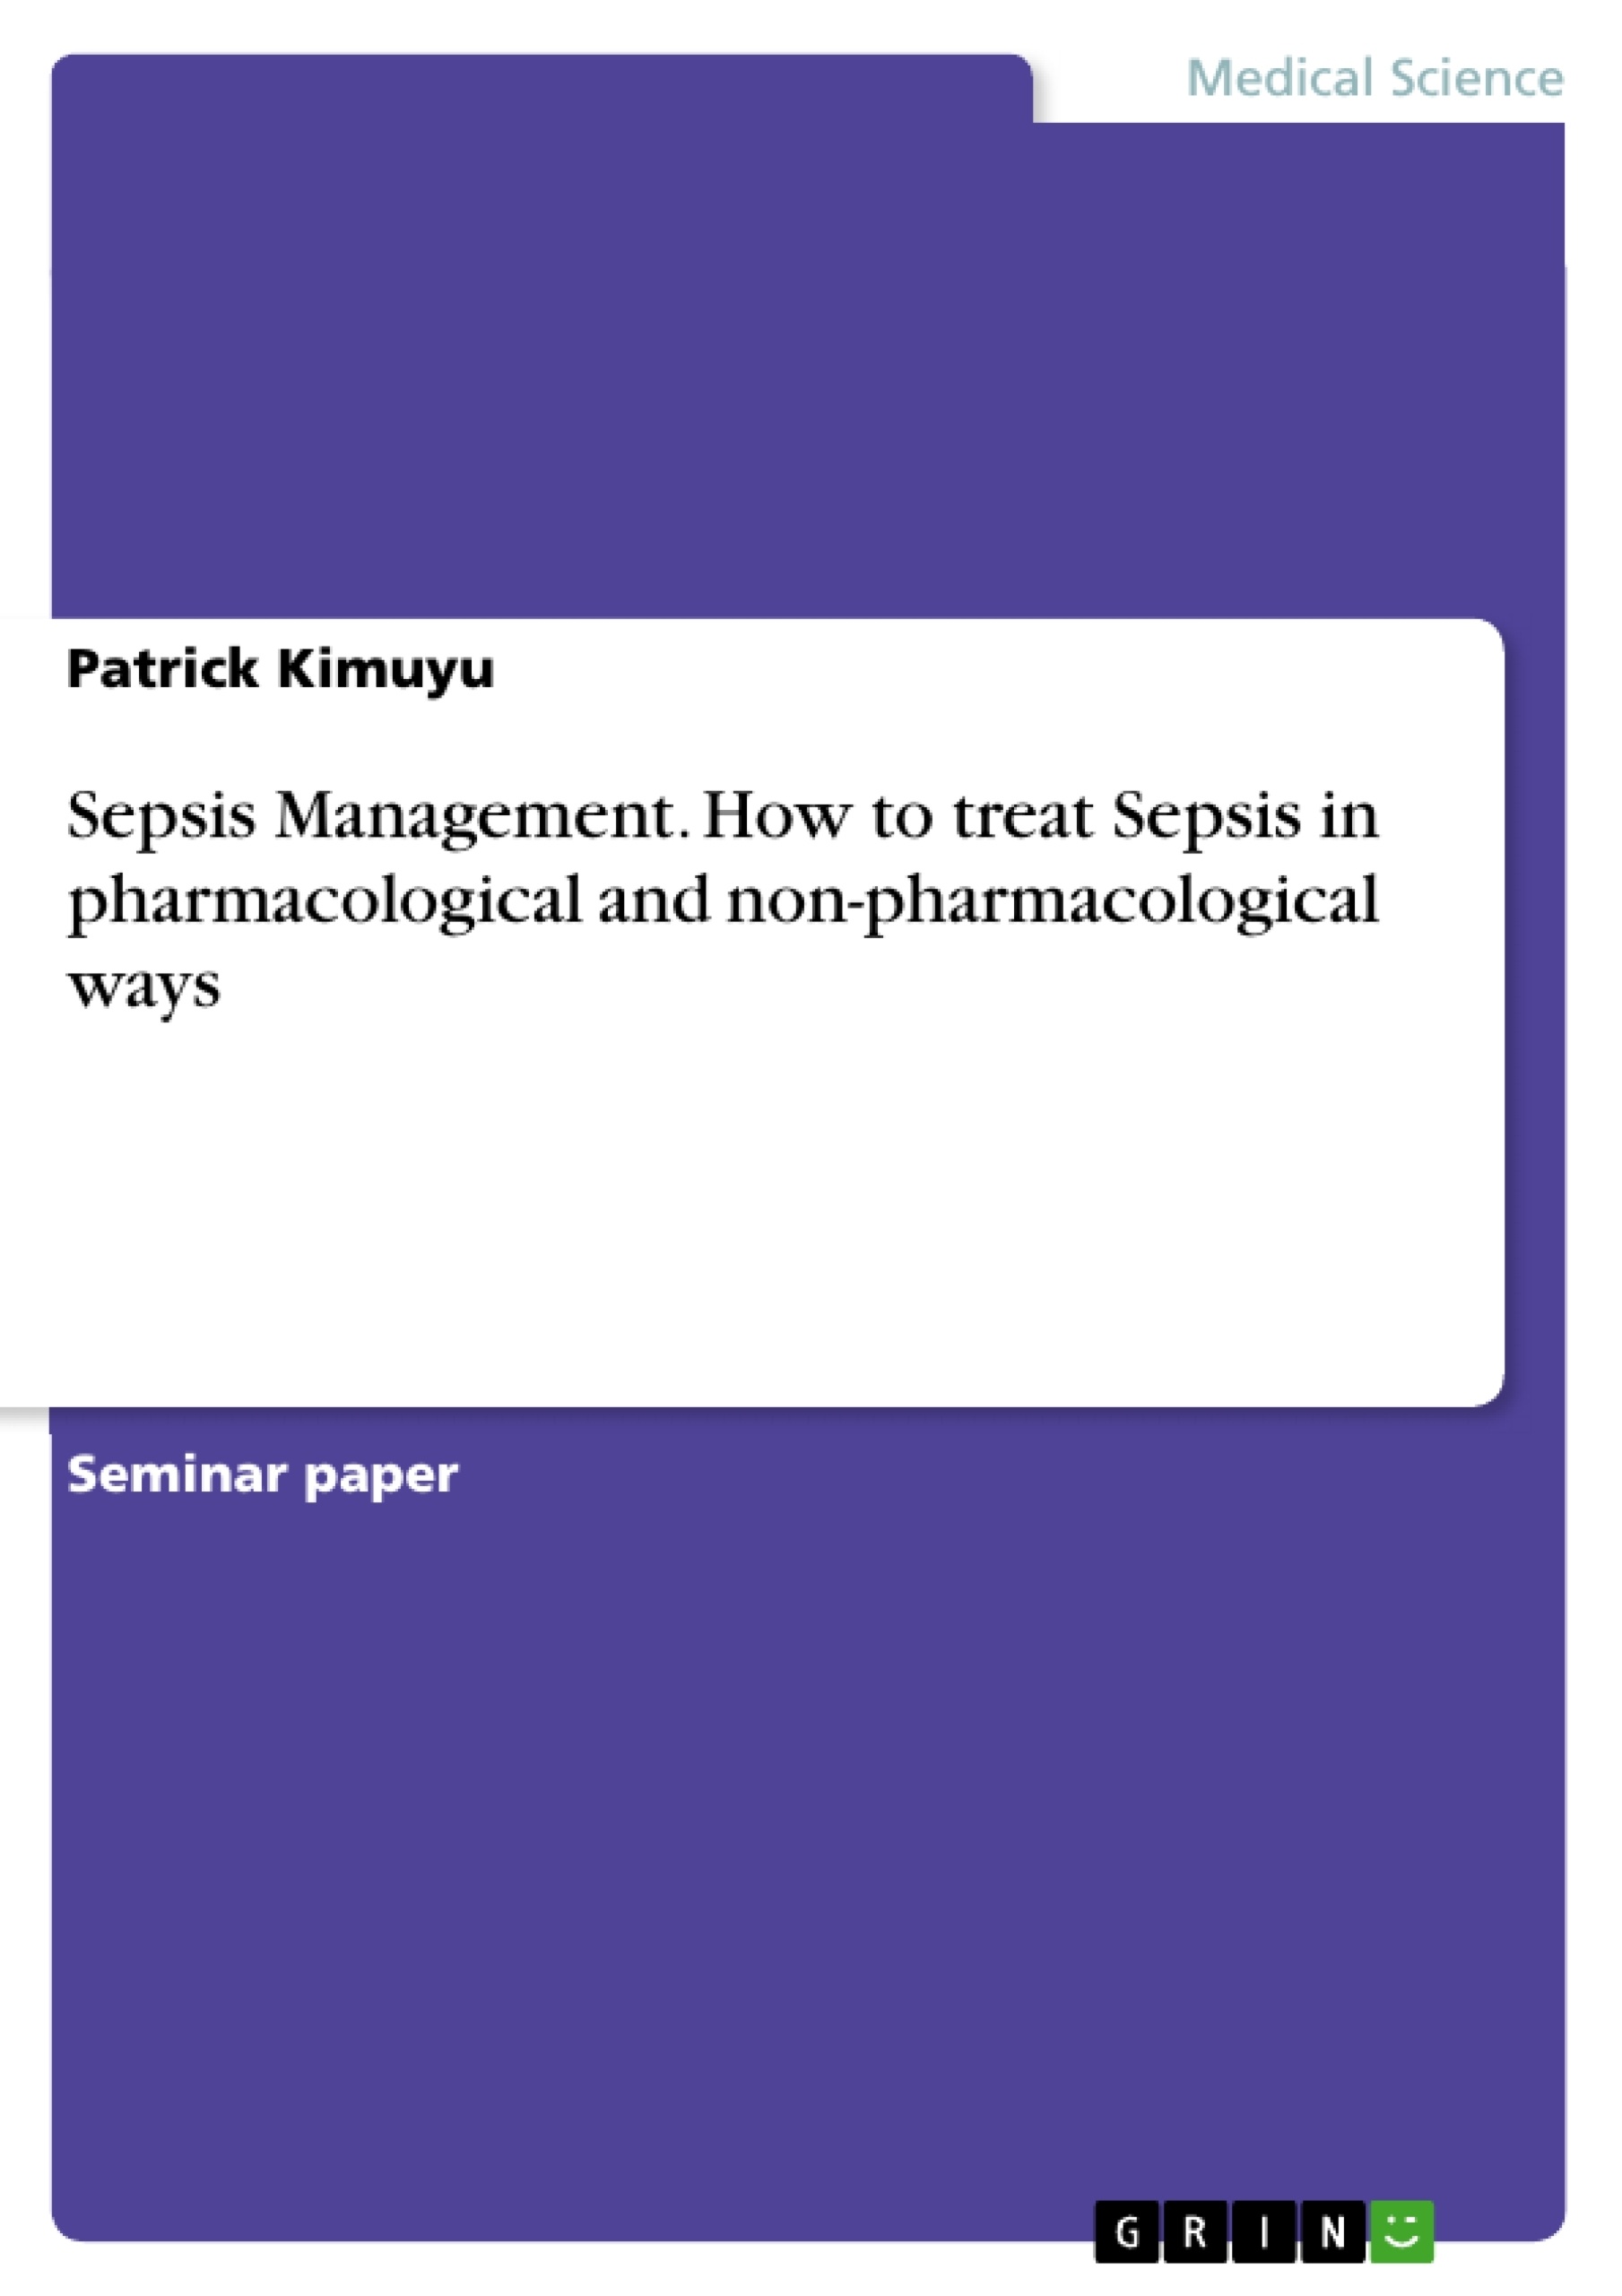 Title: Sepsis Management. How to treat Sepsis in pharmacological and non-pharmacological ways